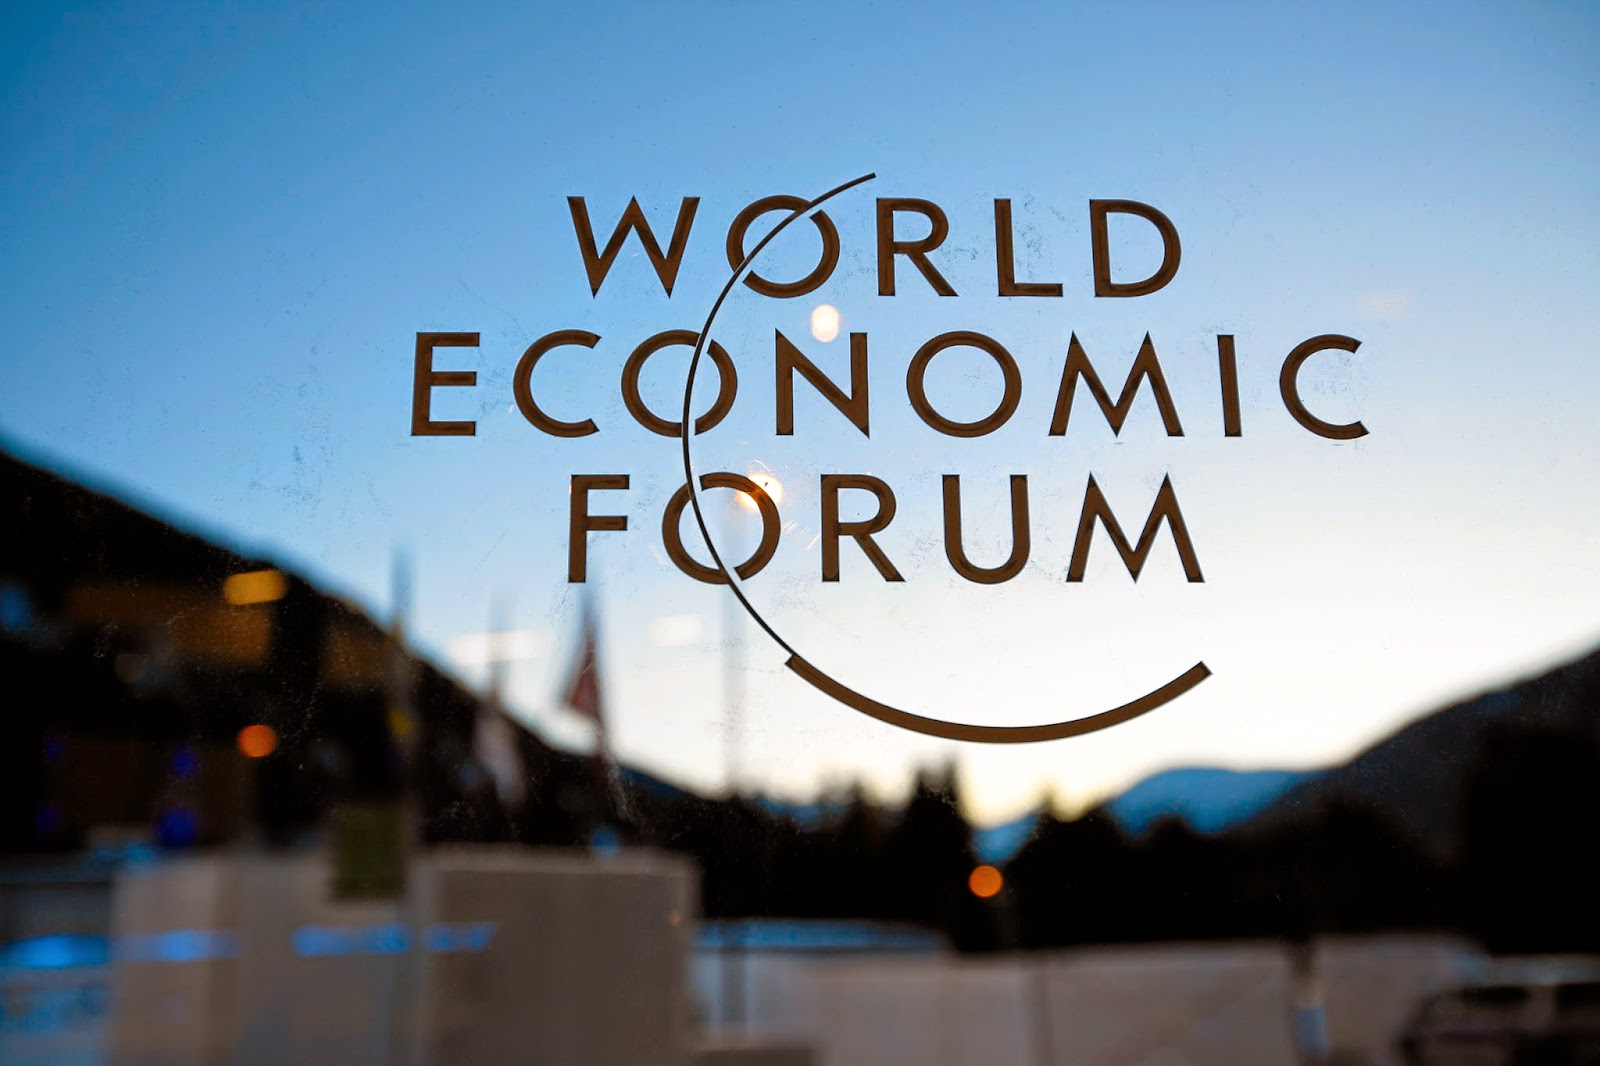 World Economic Forum, Davos Summit, Davos Man, rising inequality, income inequality, wealth inequality, solutions to inequality, corporate social responsibility, Oxfam, public-private partnerships